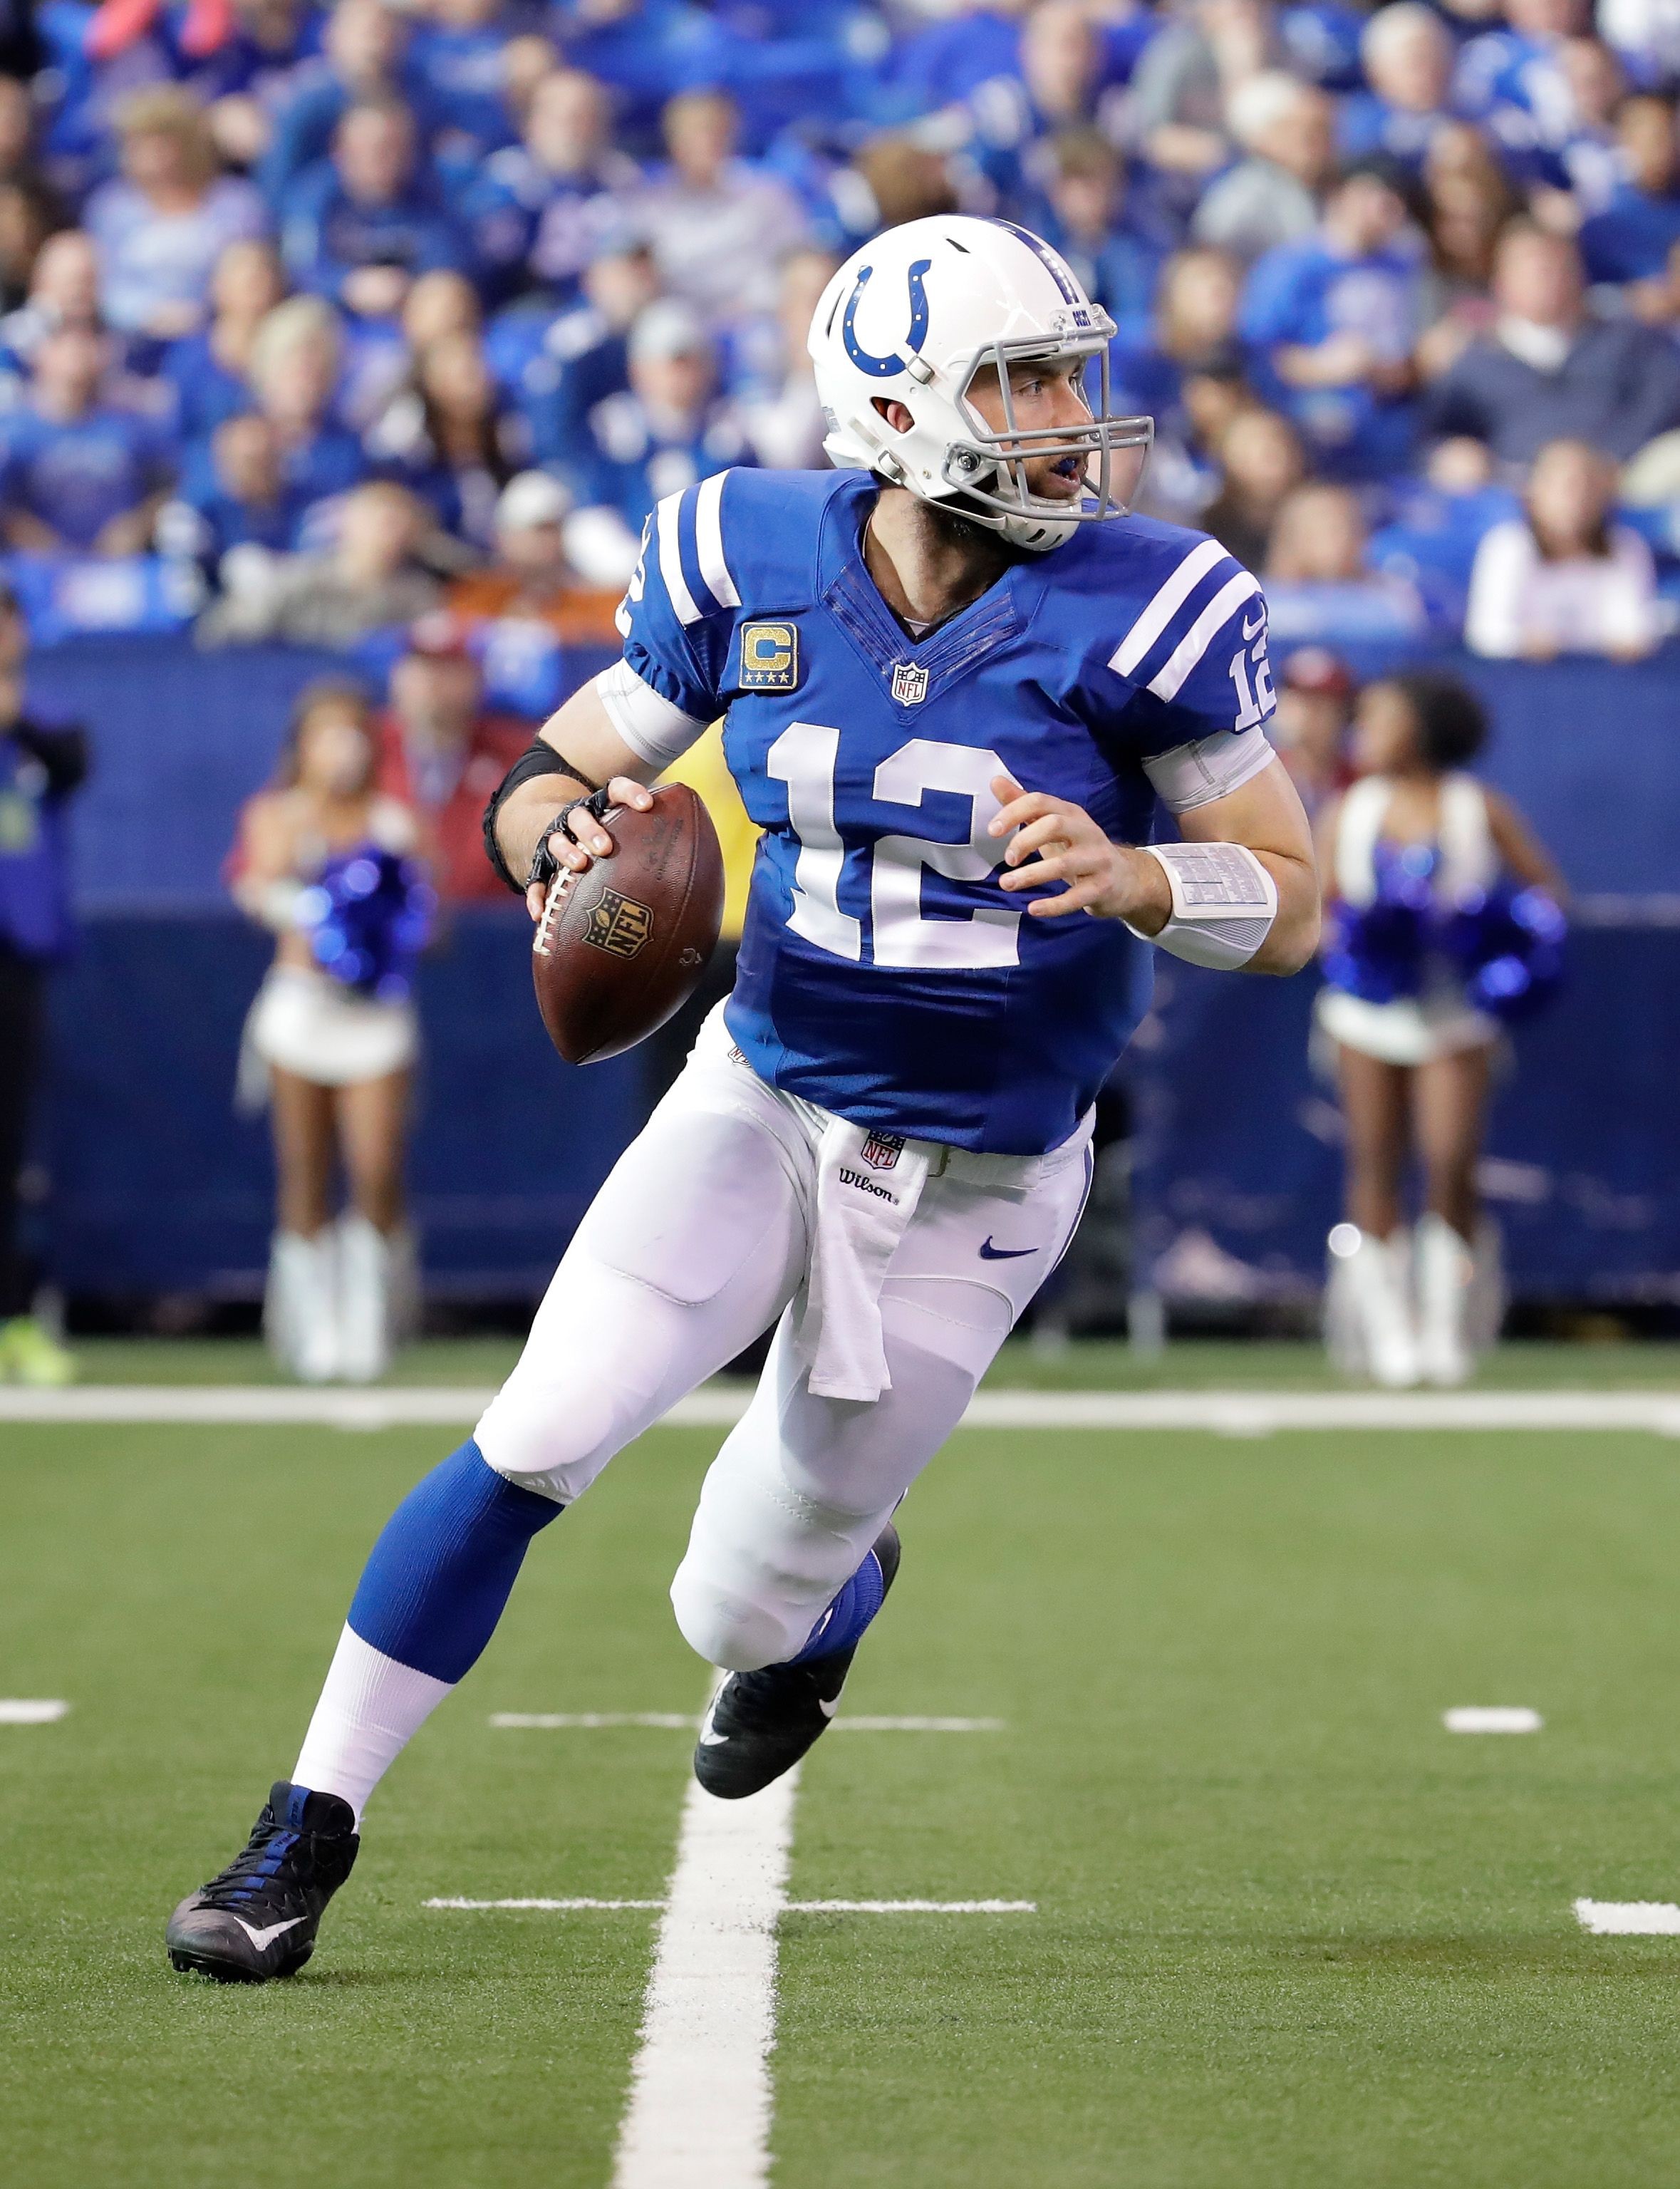 Colts Preview What to Watch During First Preseason Game